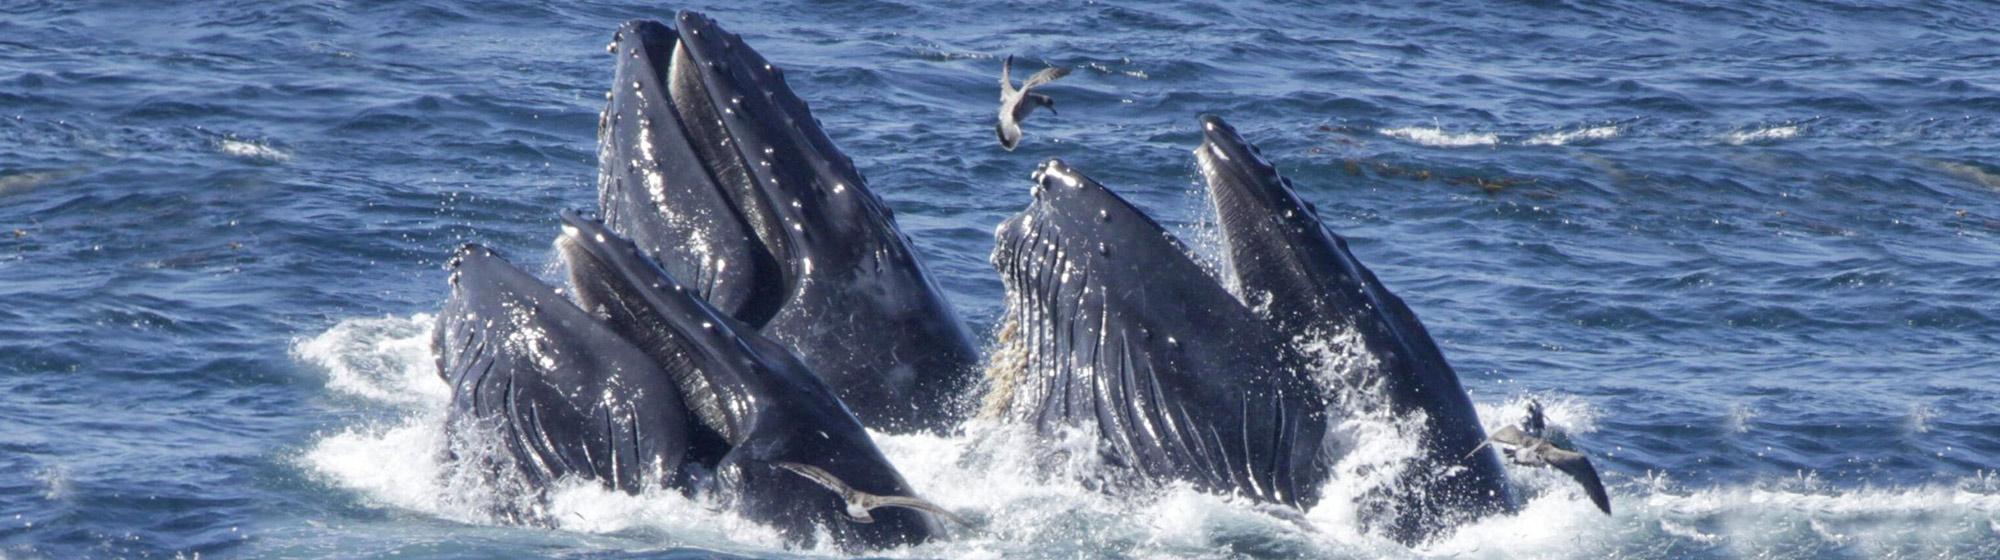 Photo of Whales breaching in the waters of Point Lobos State Natural Reserve. Photo credit: Janet Beaty.